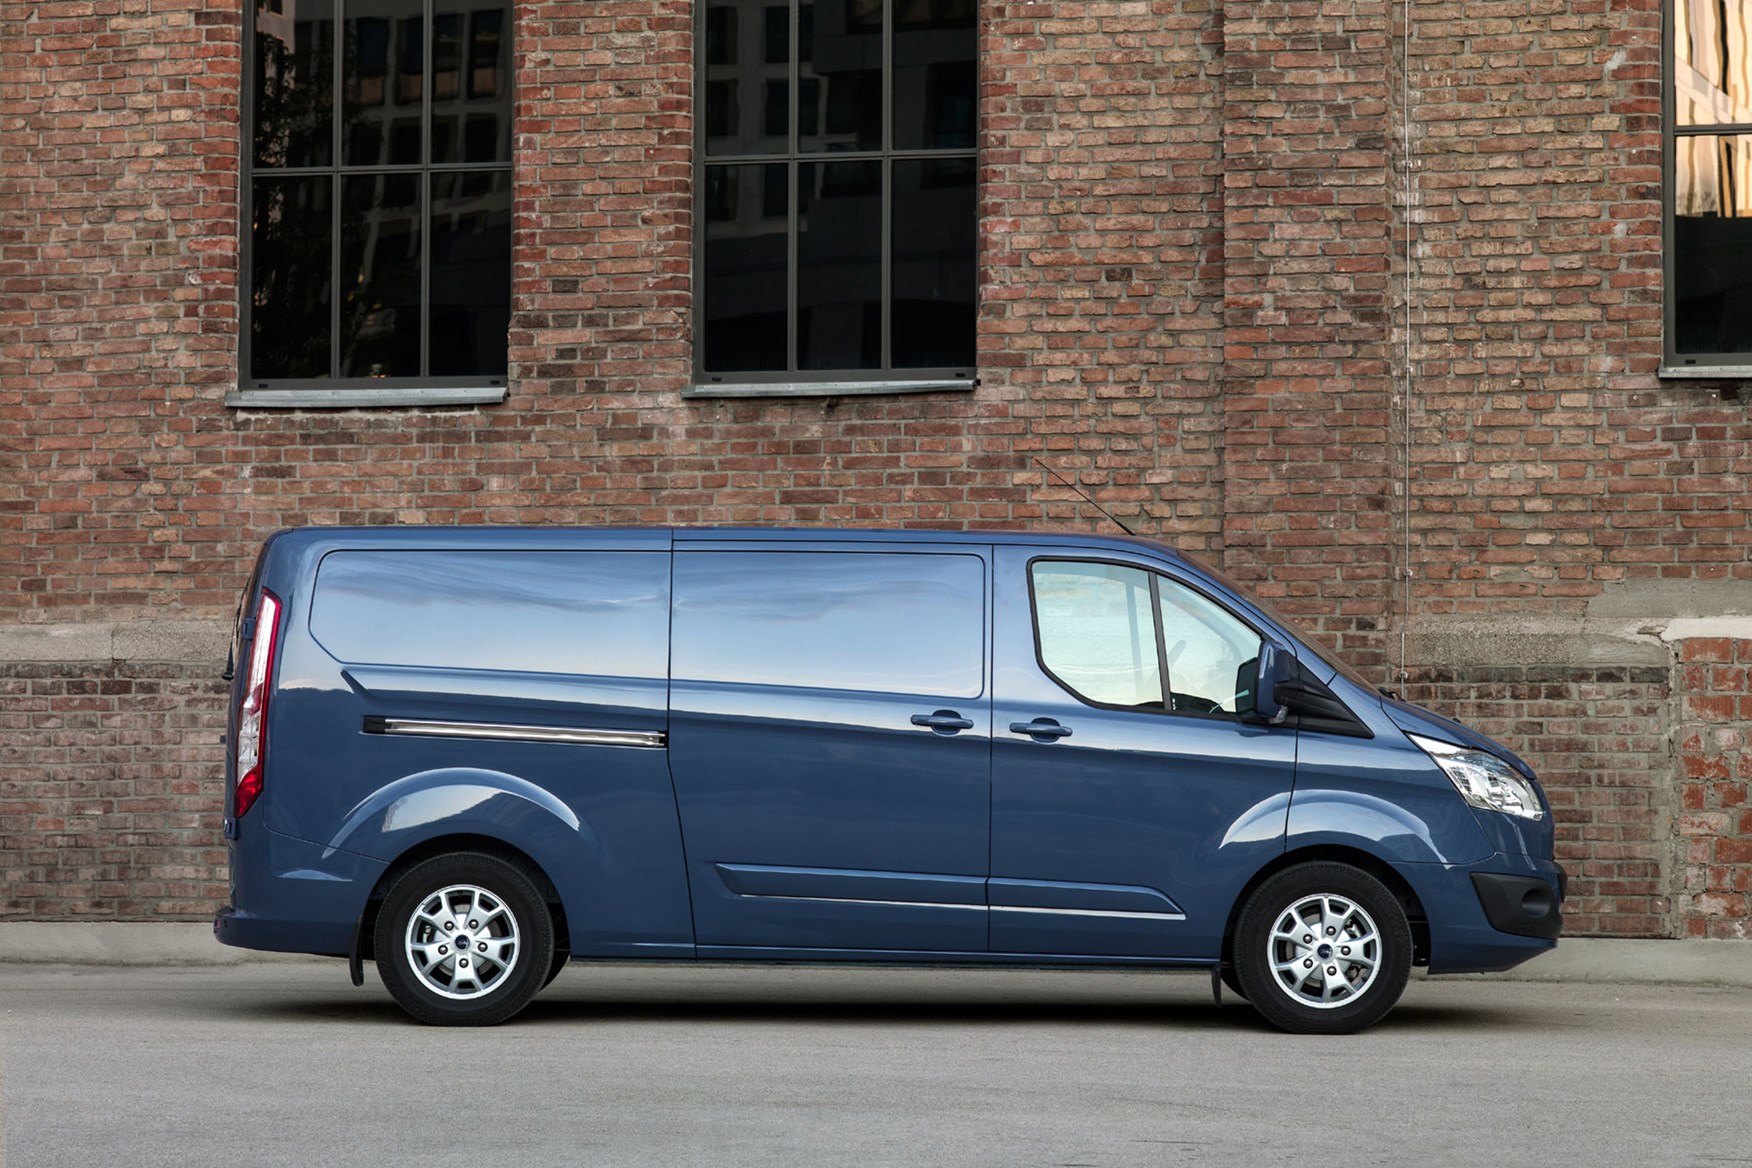 Ford Transit Custom dimensions - 2012 pre-facelift L2 side view